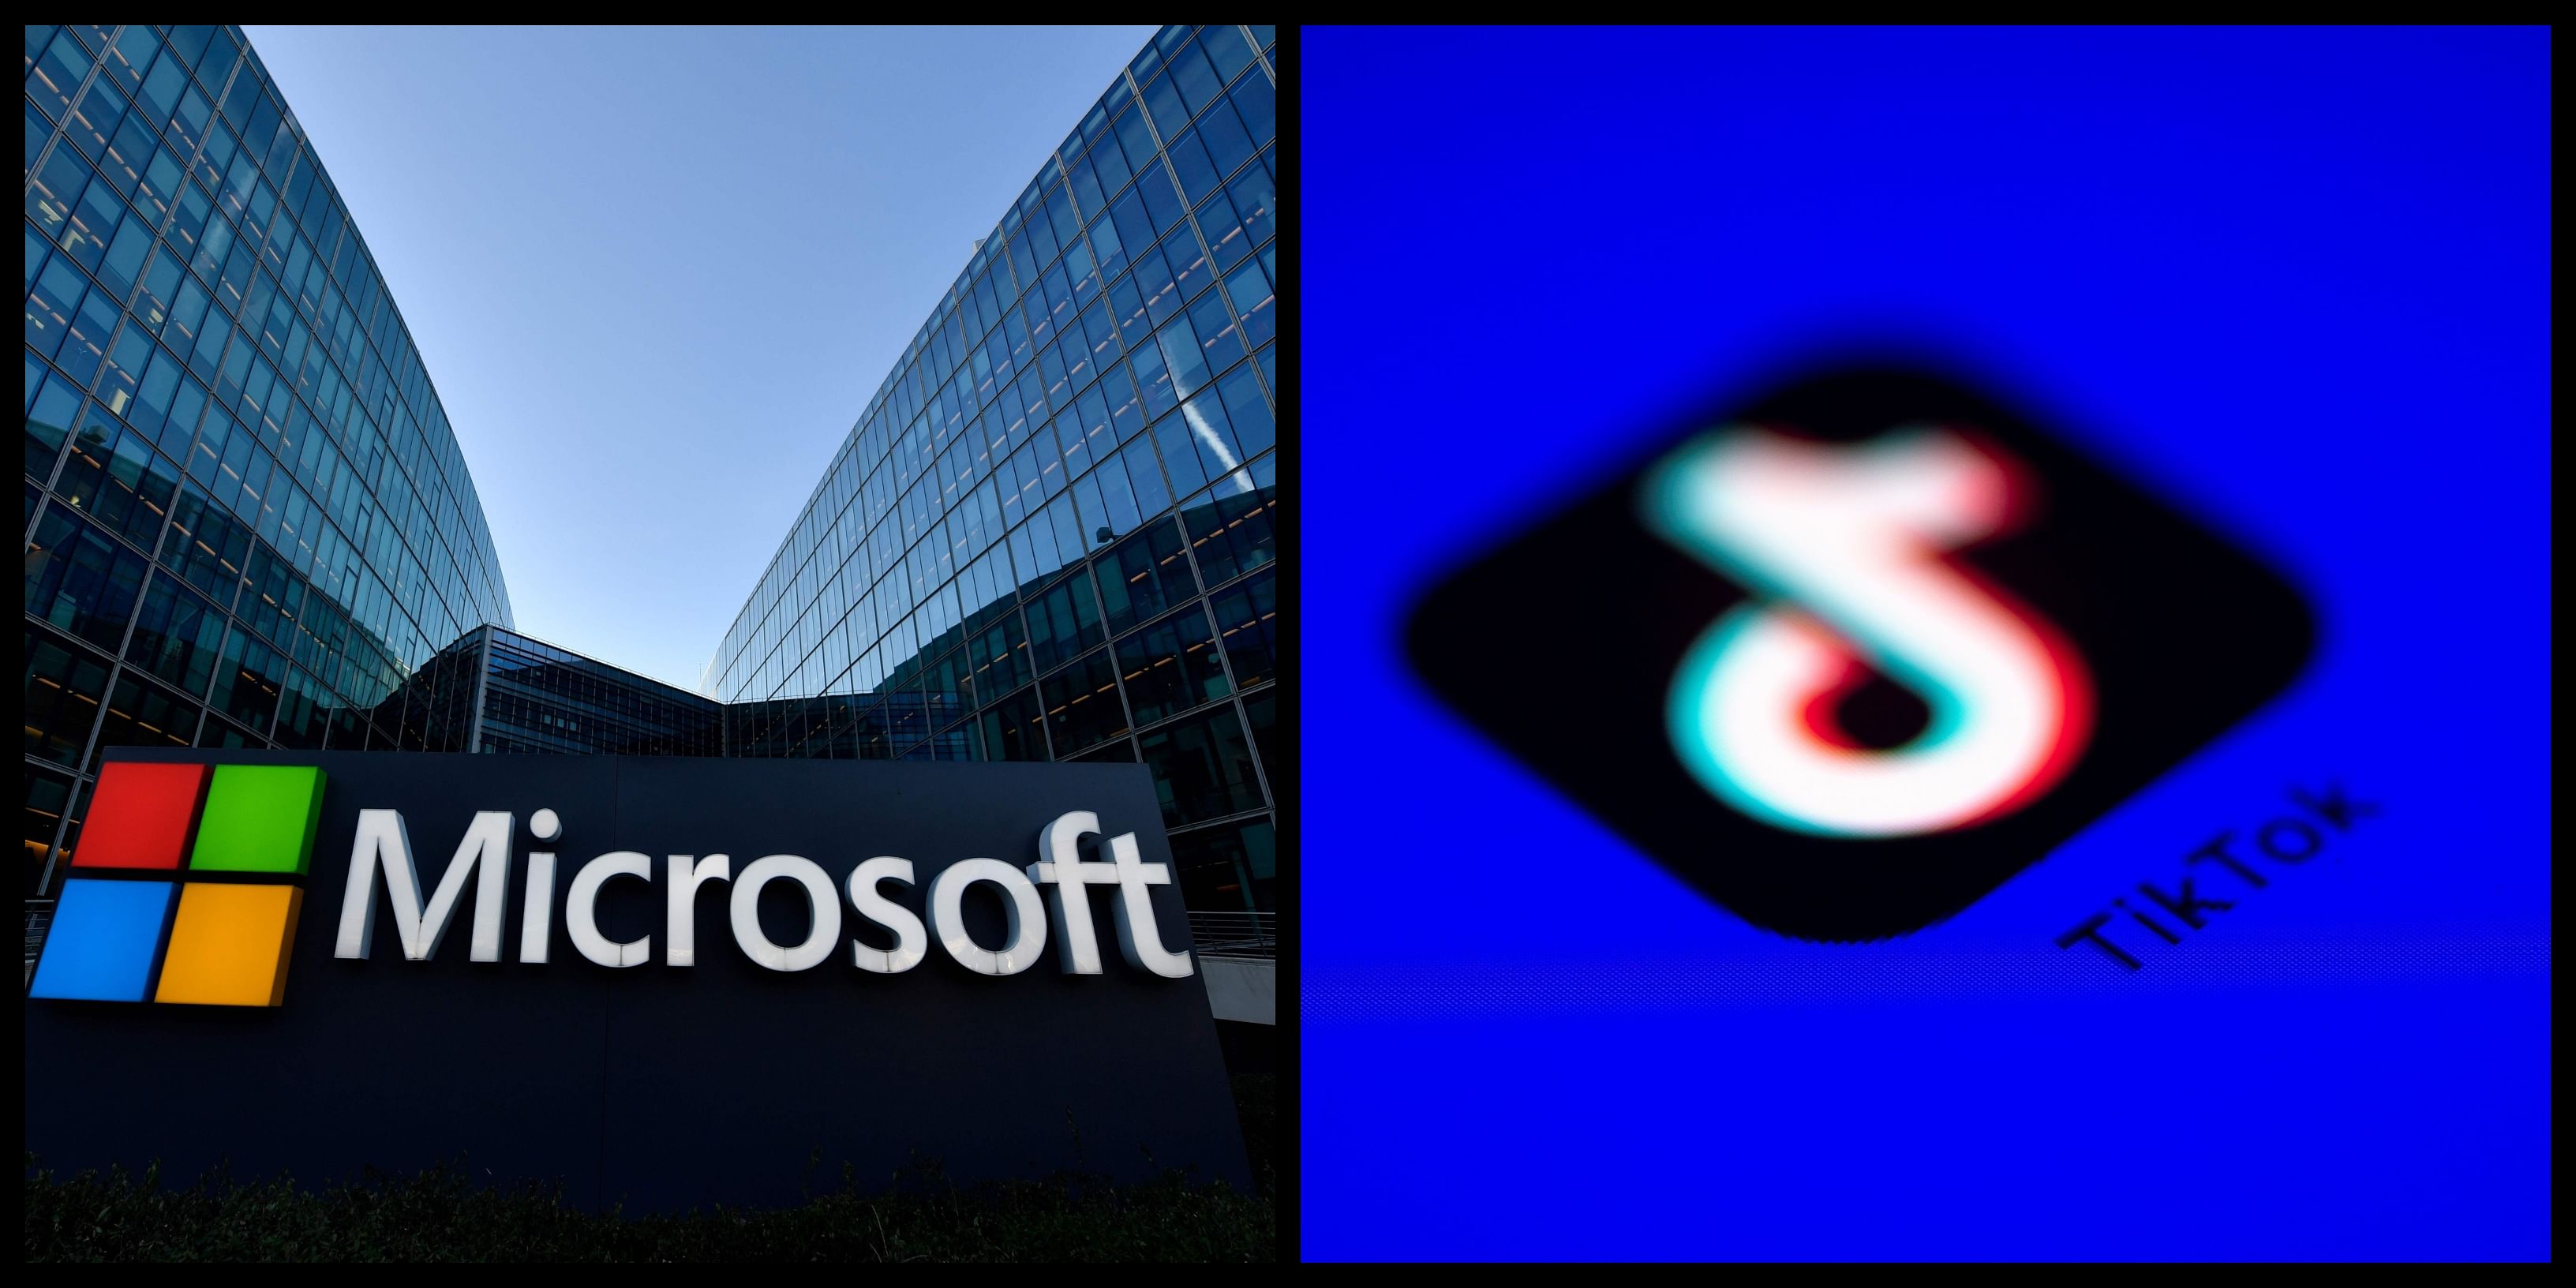 Microsoft announced in a blog post that it would continue holding talks to buy TikTok in the United States. Credit: AFP Photos